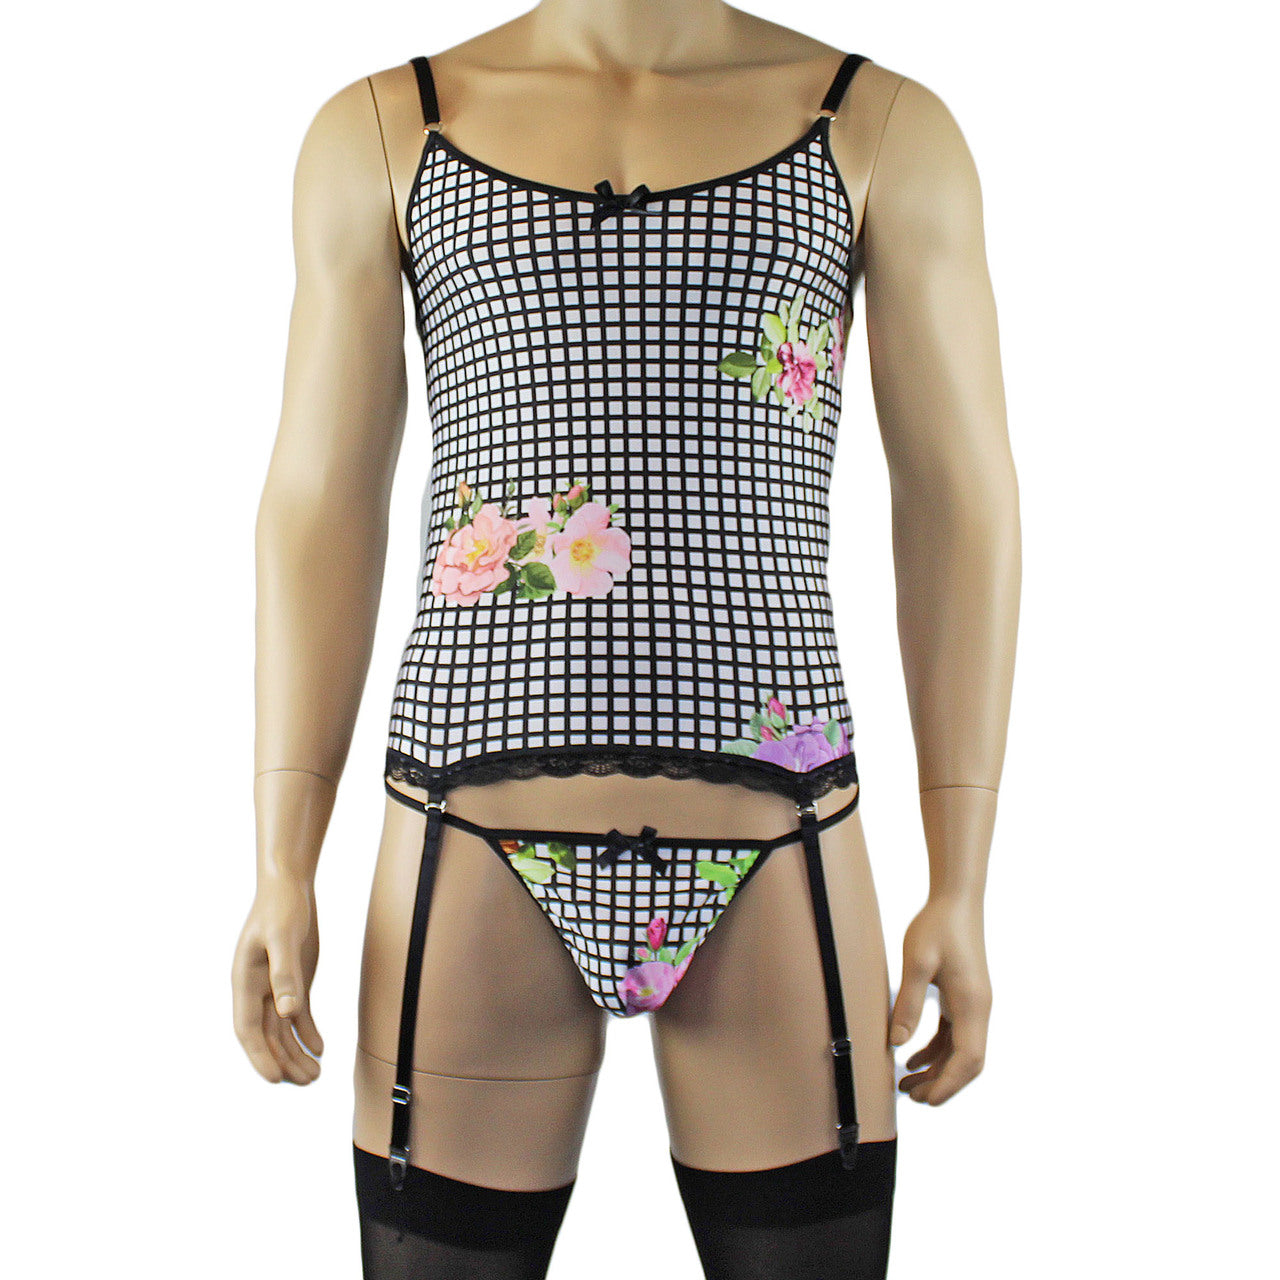 Mens Diana Camisole Corset Top & G string in a Pretty Flower Checkered Print Spandex